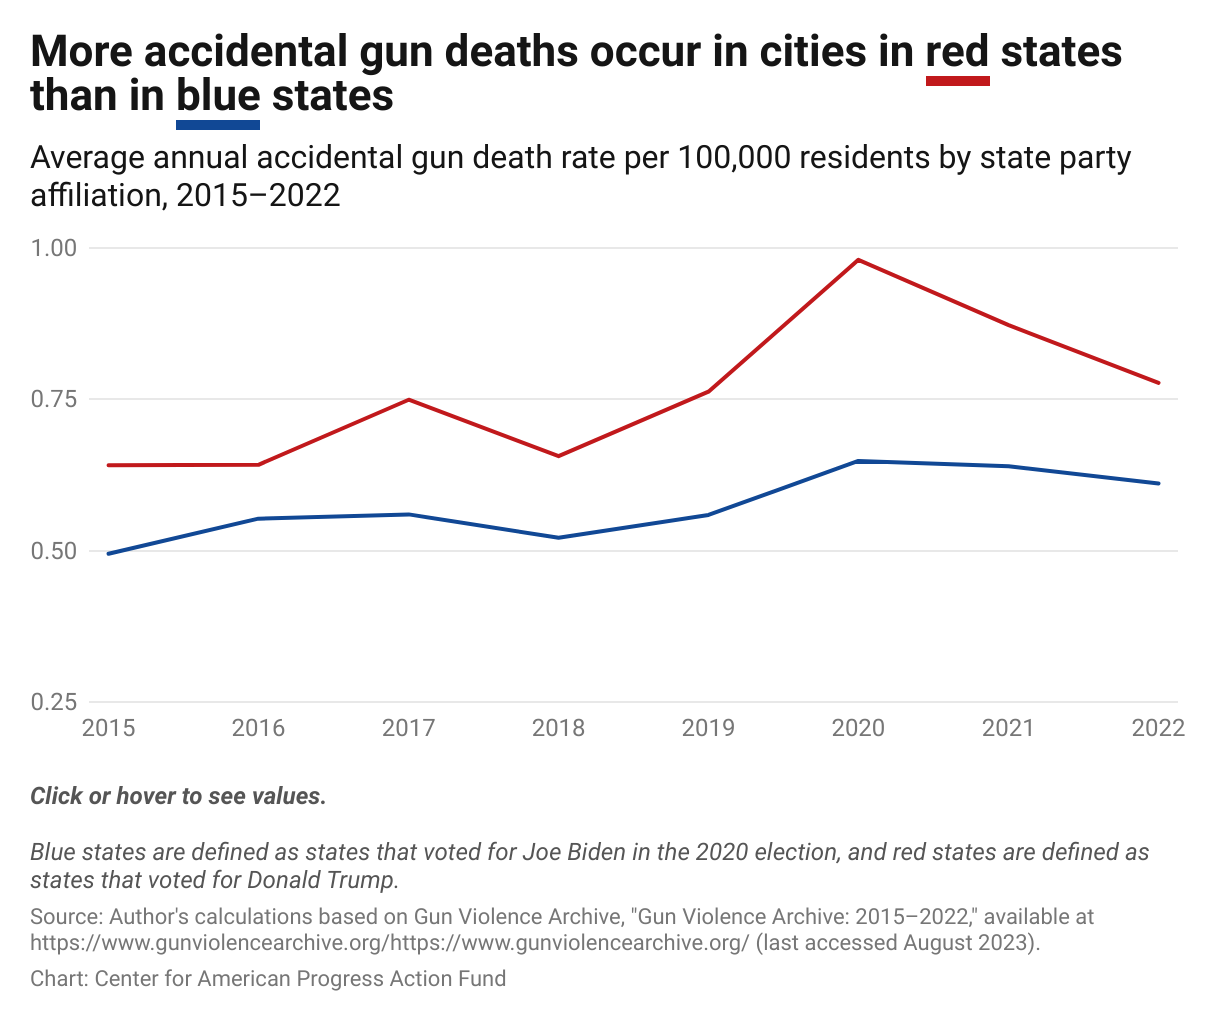 Line graph showing population-adjusted annual rates of gun-related accidental deaths in the 300 largest U.S. cities based on their state's party affiliation. Cities in states that voted for President Joe Biden in the 2020 election have consistently lower rates of accidental deaths due to firearms.